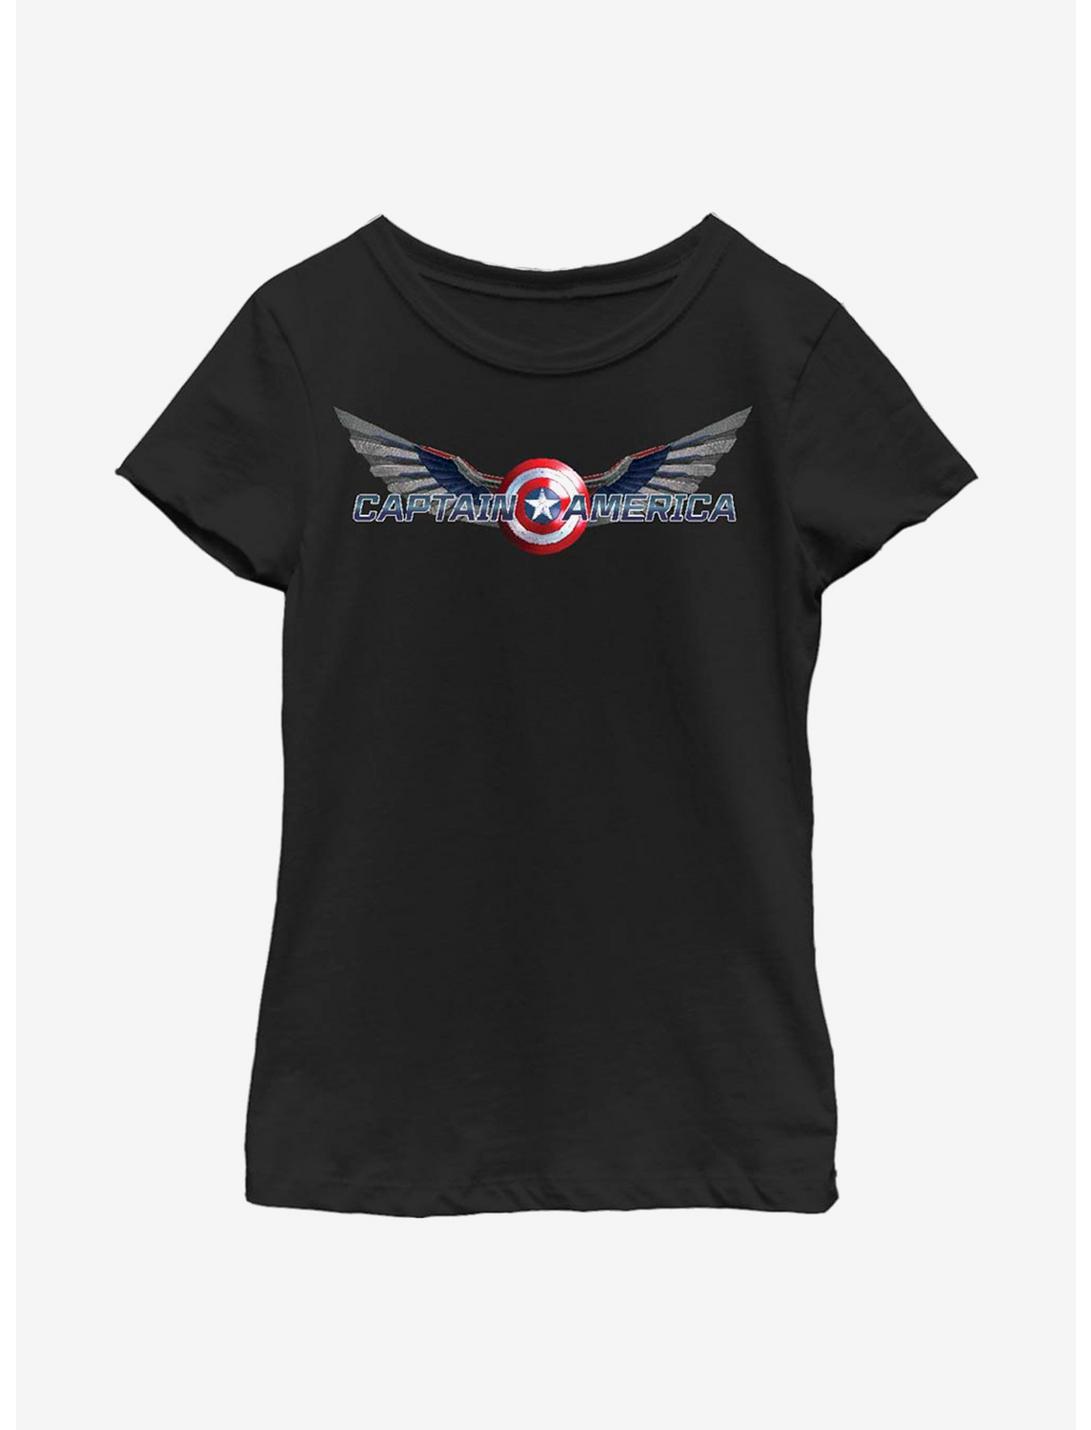 Marvel The Falcon And The Winter Soldier Captain America Symbol Youth Girls T-Shirt, BLACK, hi-res